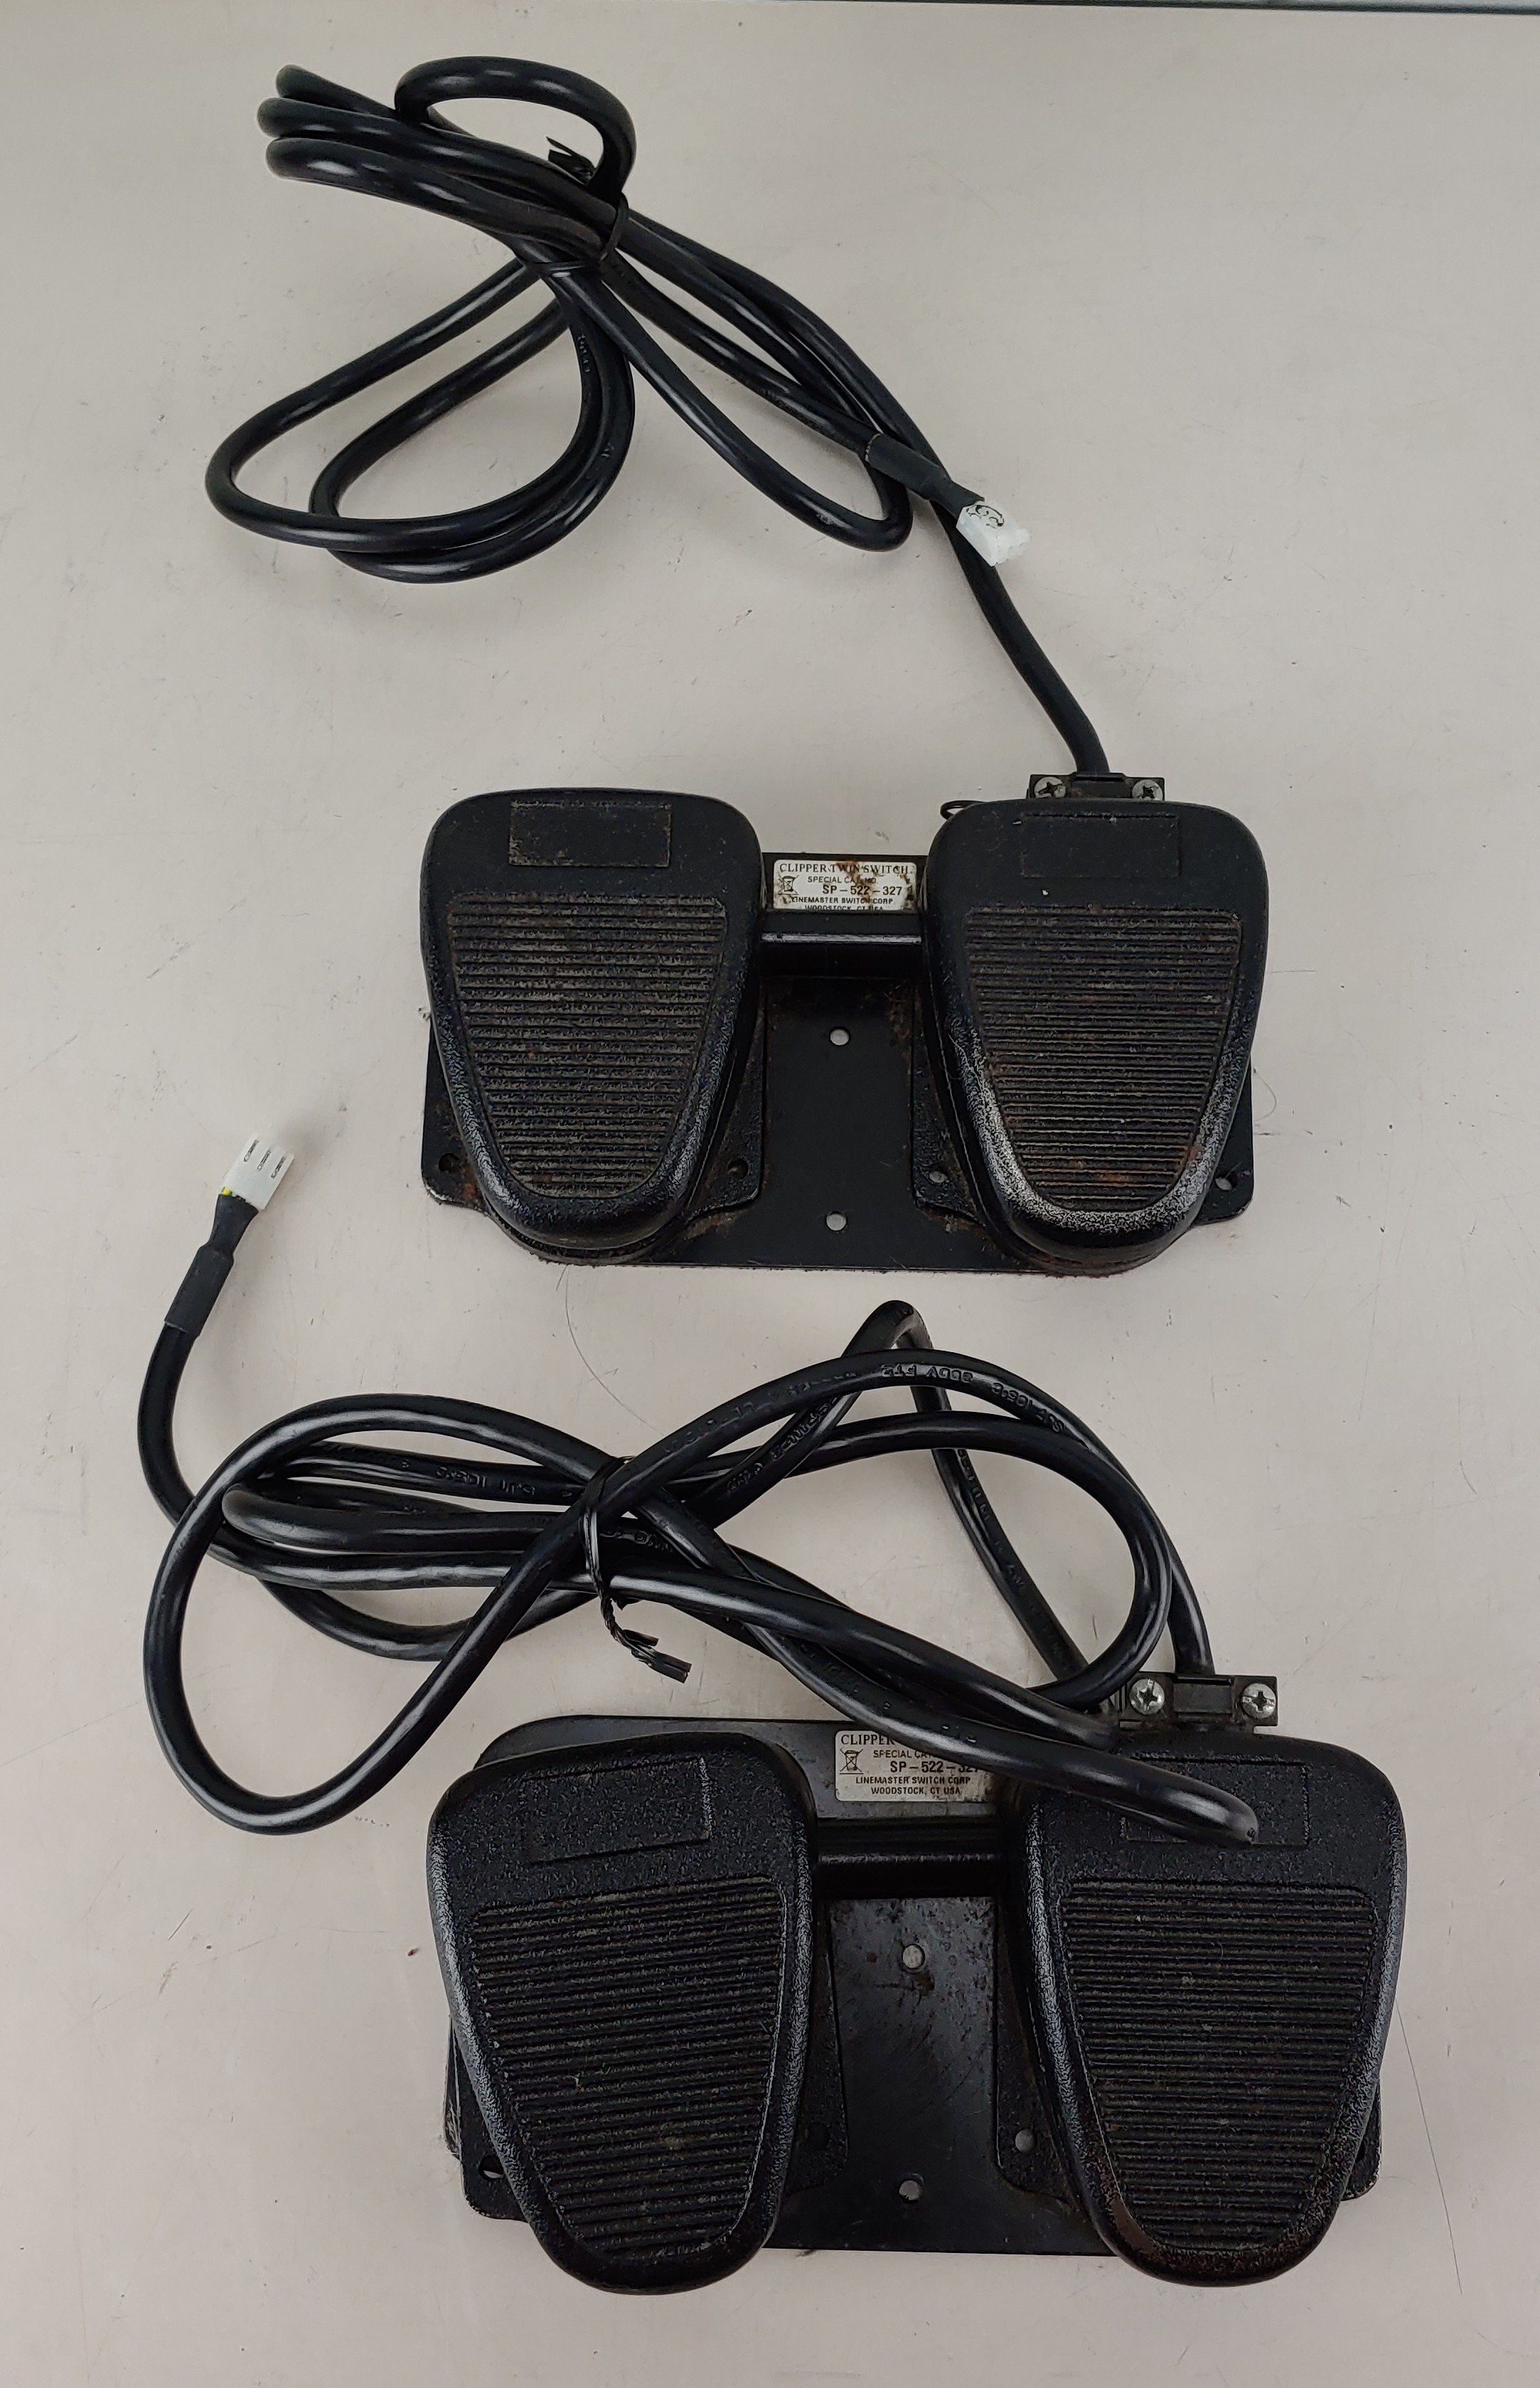 Lot of 2 LINEMASTER CLIPPER TWIN SWITCH DUAL FOOT PEDAL SP-522-327